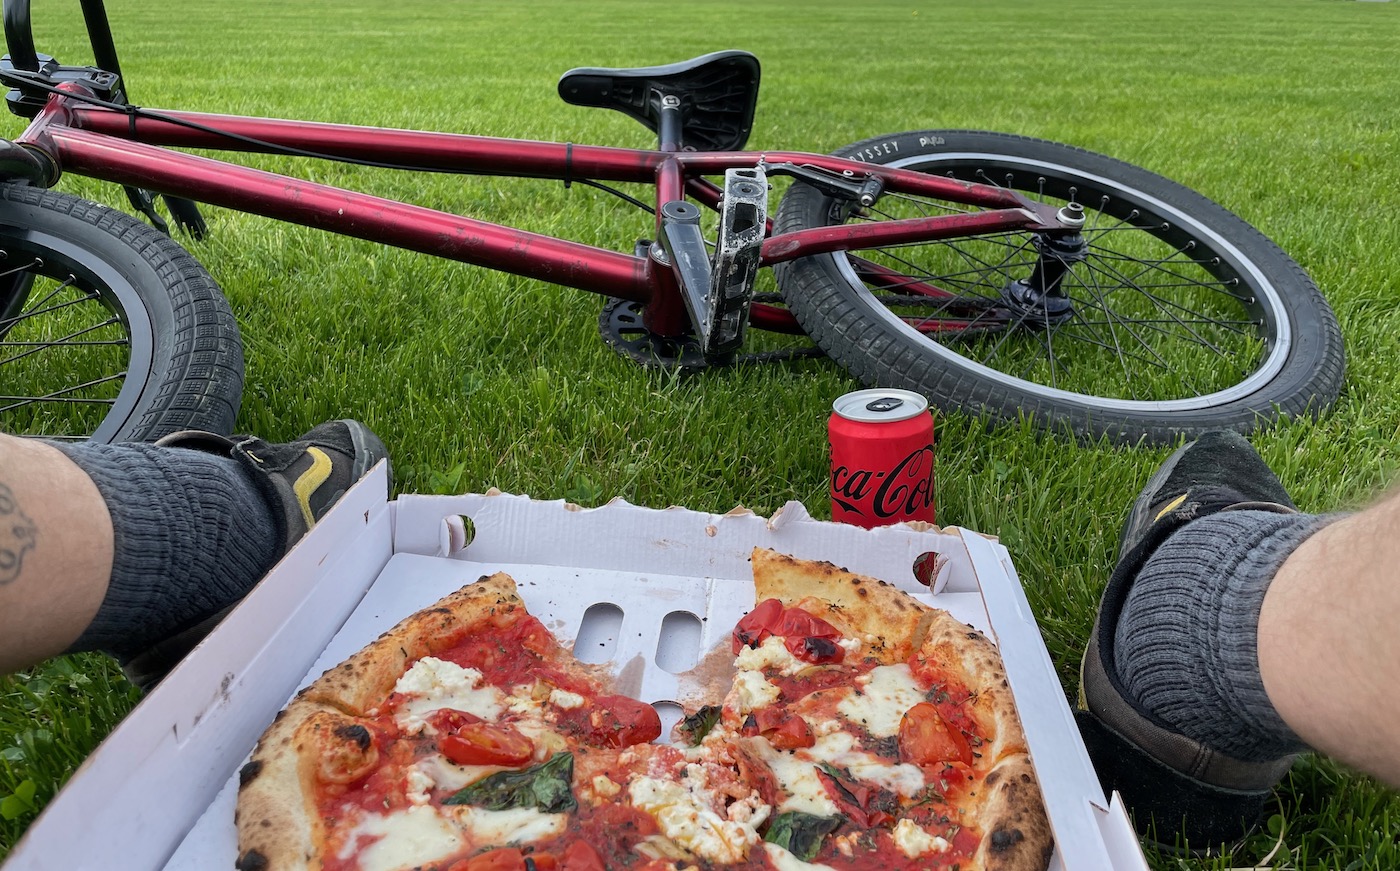 this is life: BMX, pizza & soda